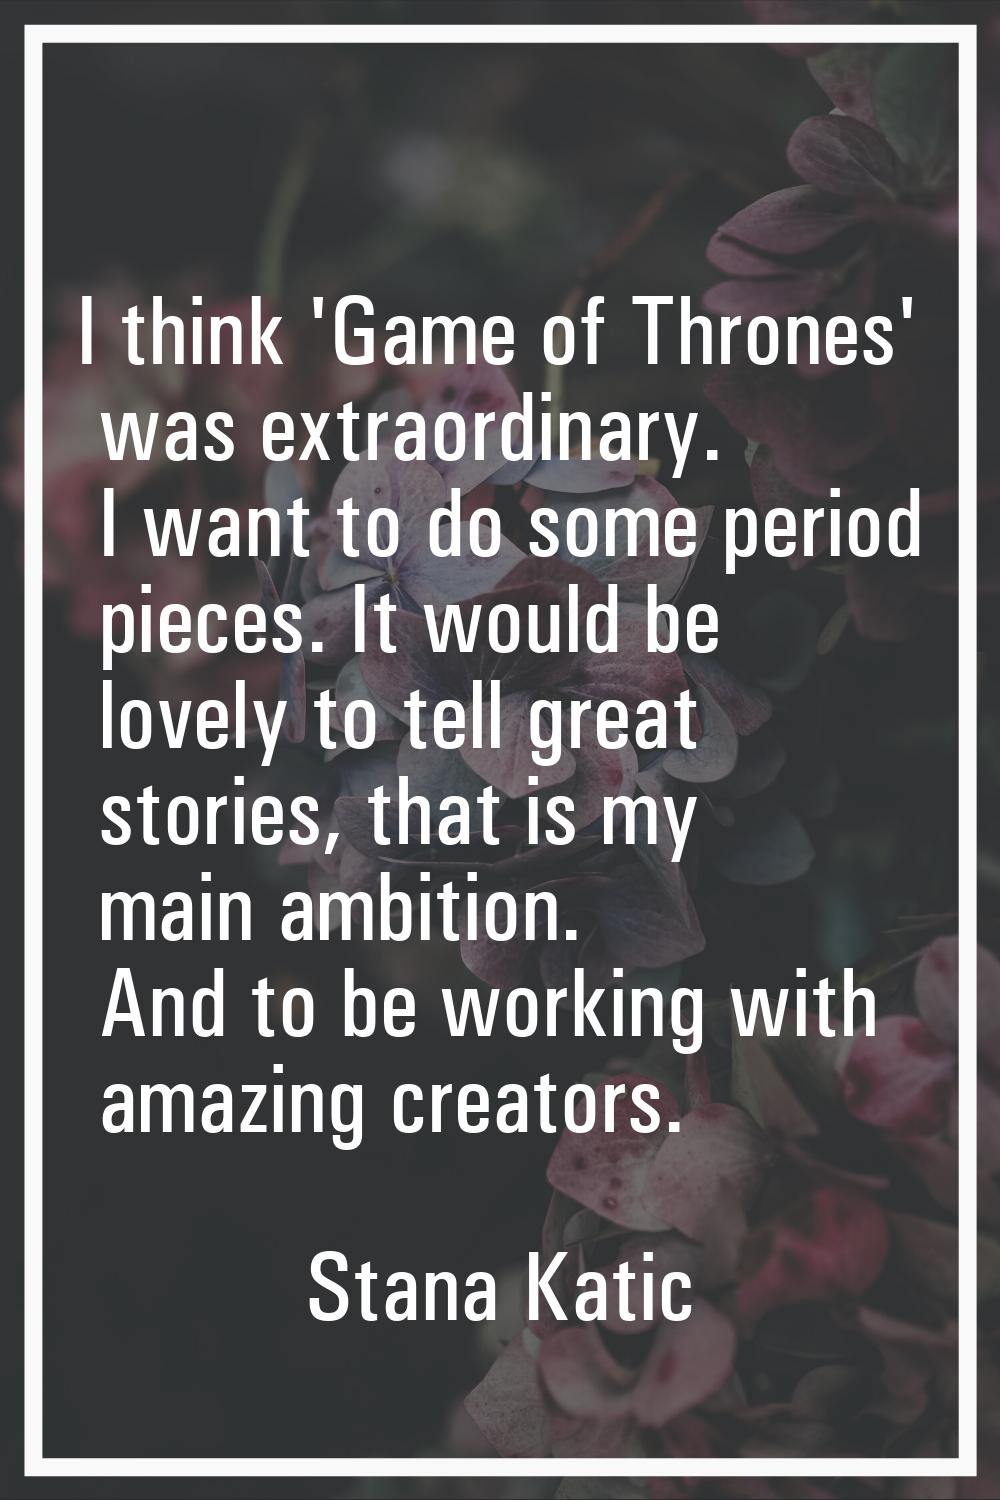 I think 'Game of Thrones' was extraordinary. I want to do some period pieces. It would be lovely to